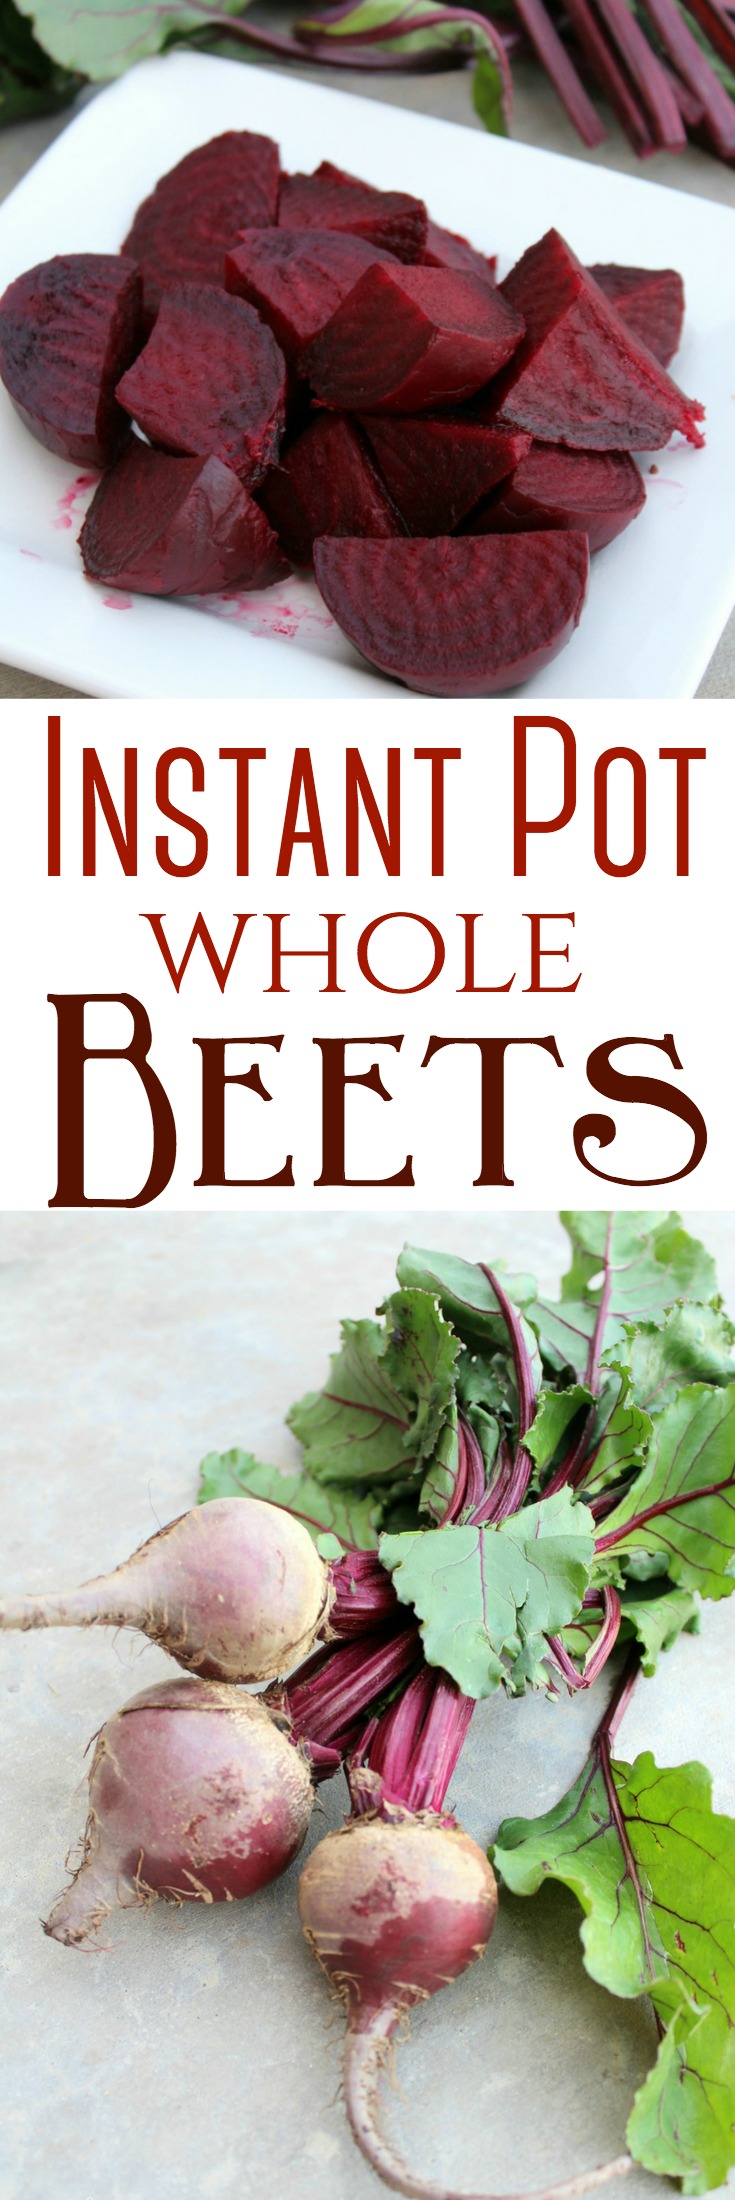 Whole beets cook up quickly and easily in the Instant Pot! #InstantPot #beets #wholebeets #pressurecooker #vegan #vegetarian #healthy